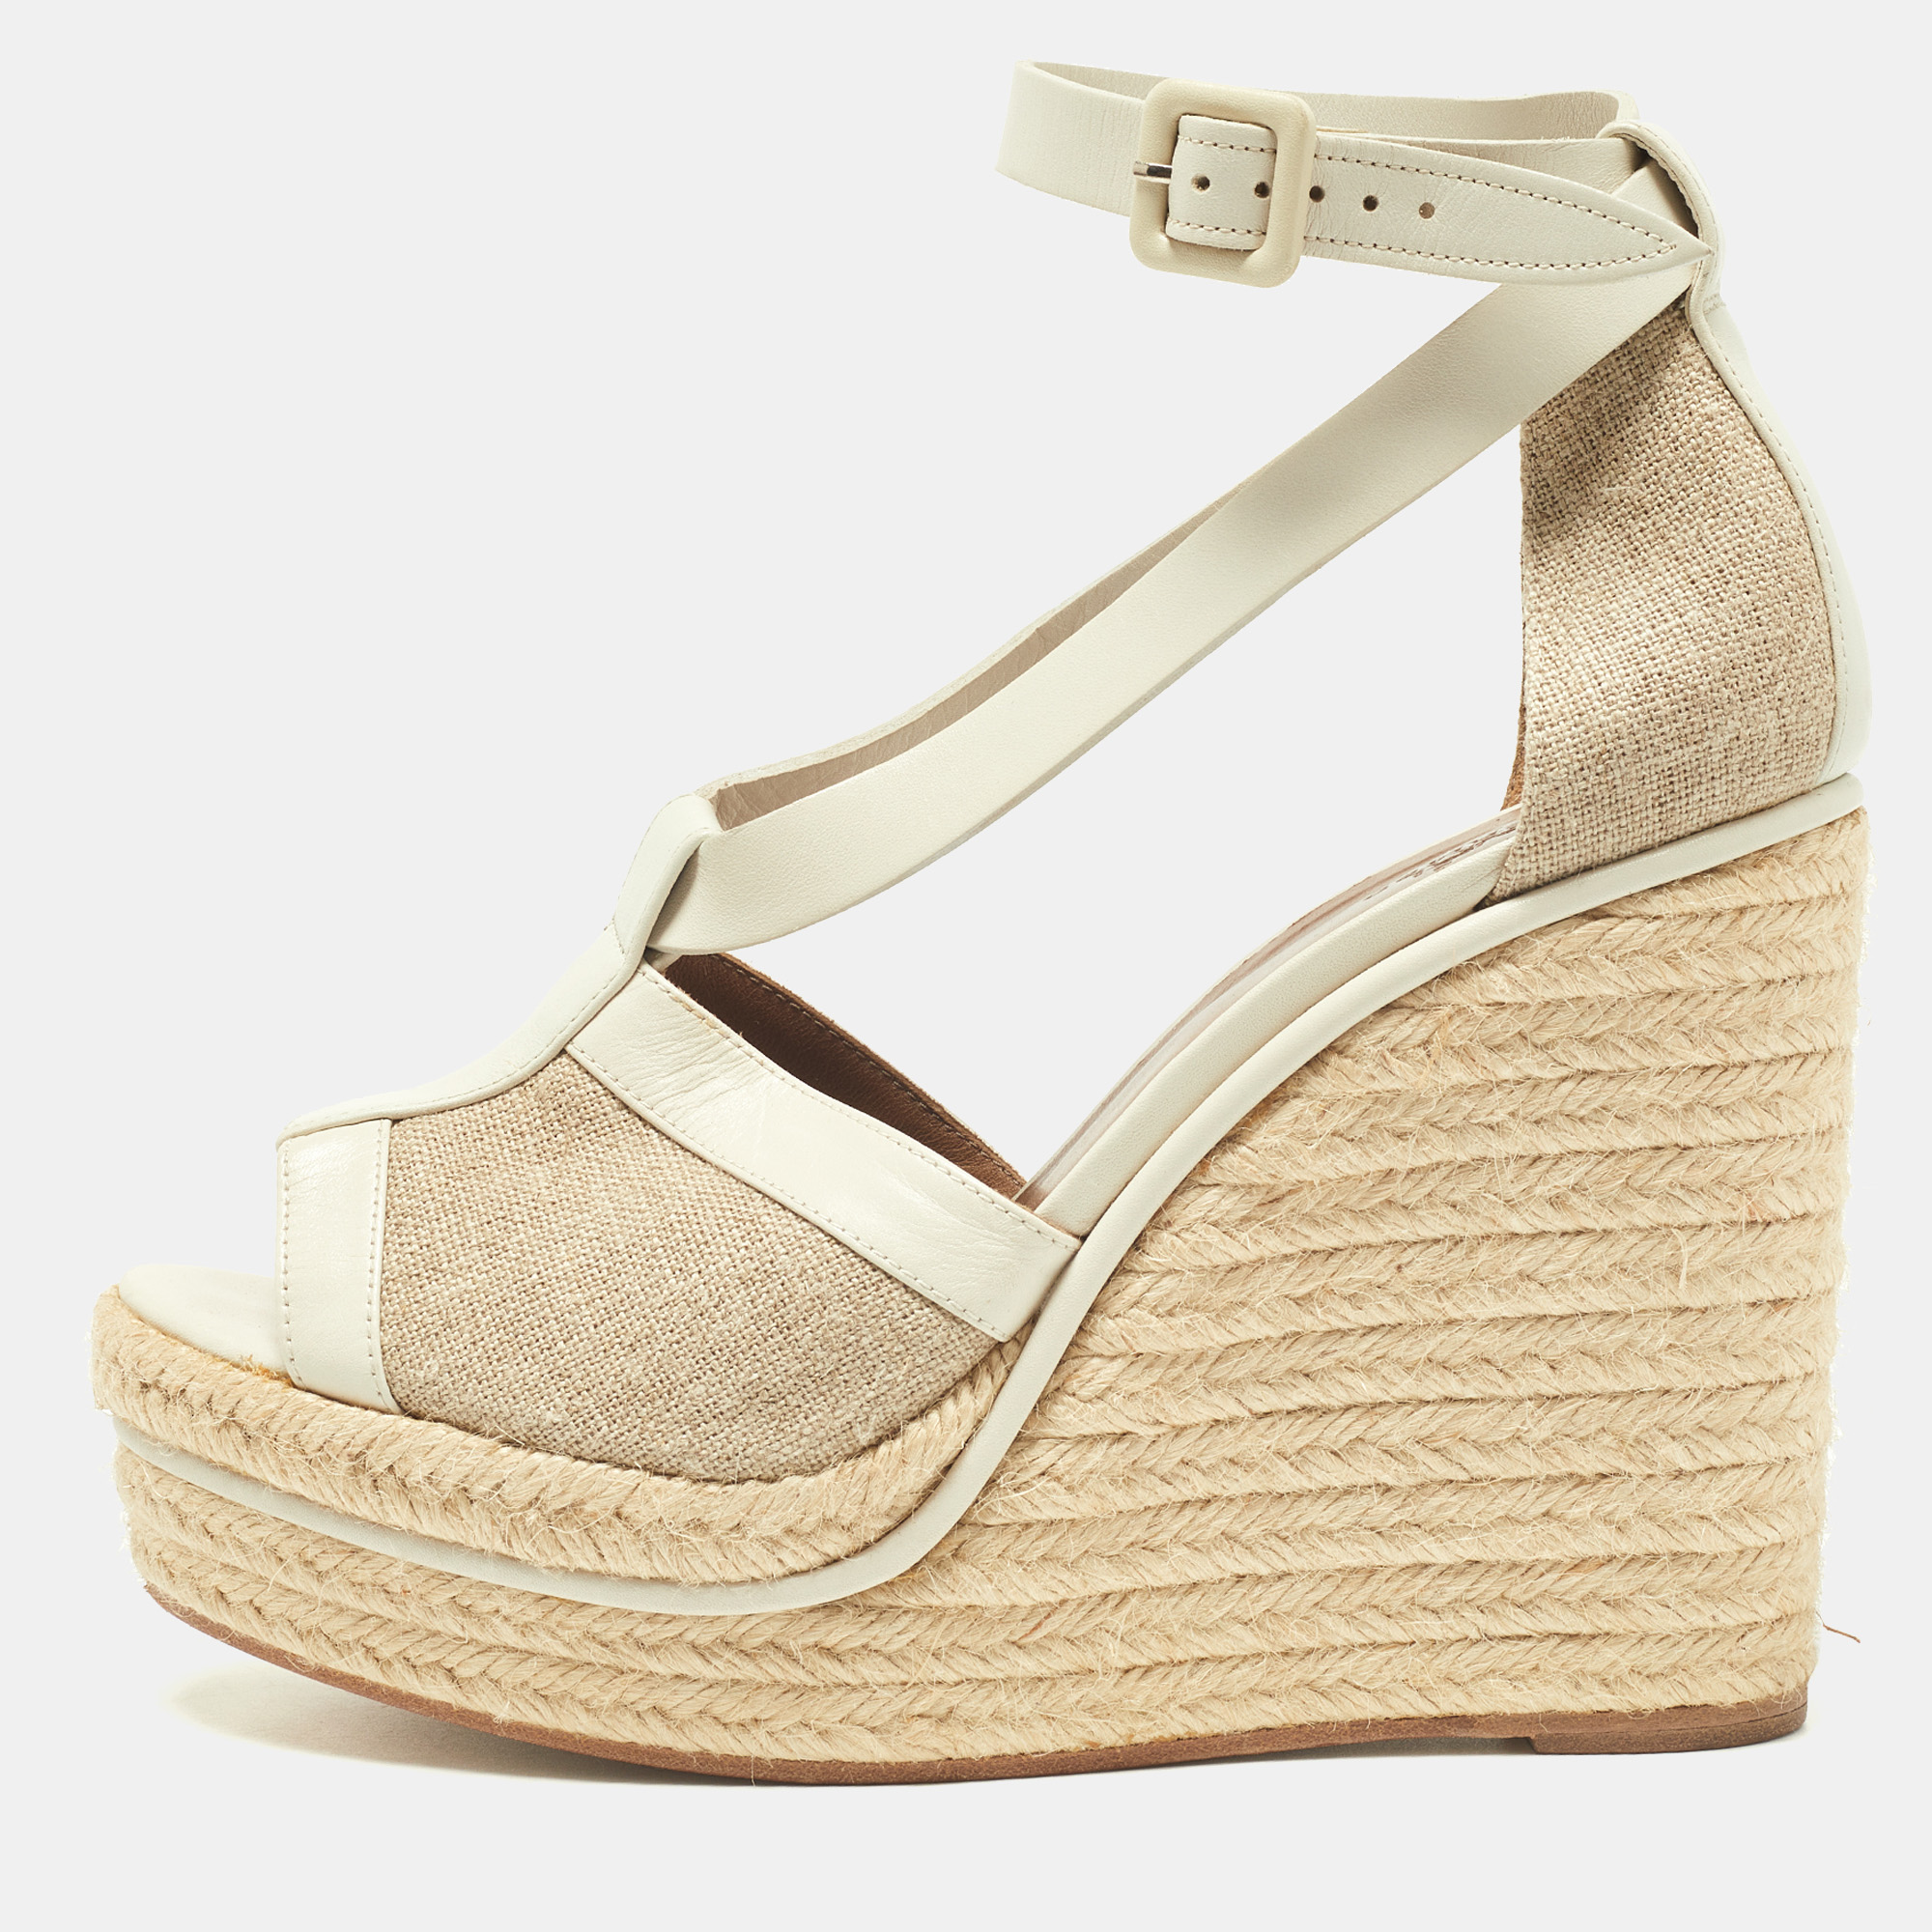 Hermes White/Beige Leather And Canvas Ibiza Espadrille Wedge Sandals Size 39